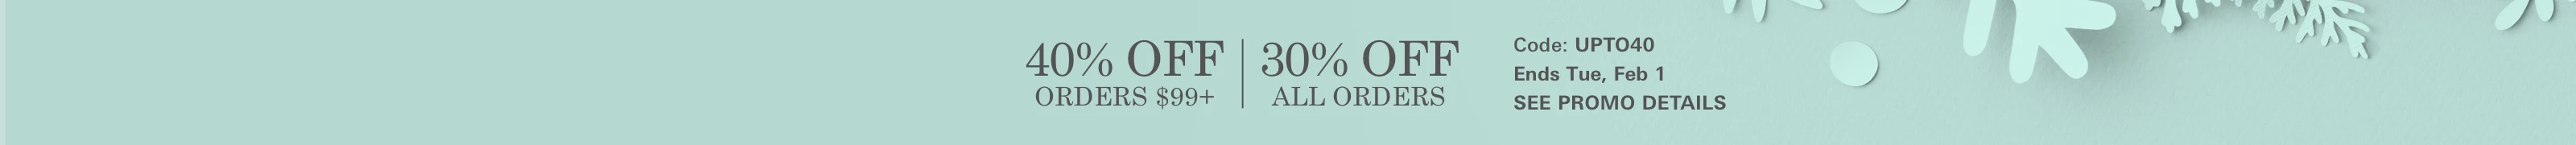 40% off orders of $99+ | 30% off all orders, code: UPTO40, Ends Tue, Feb 1